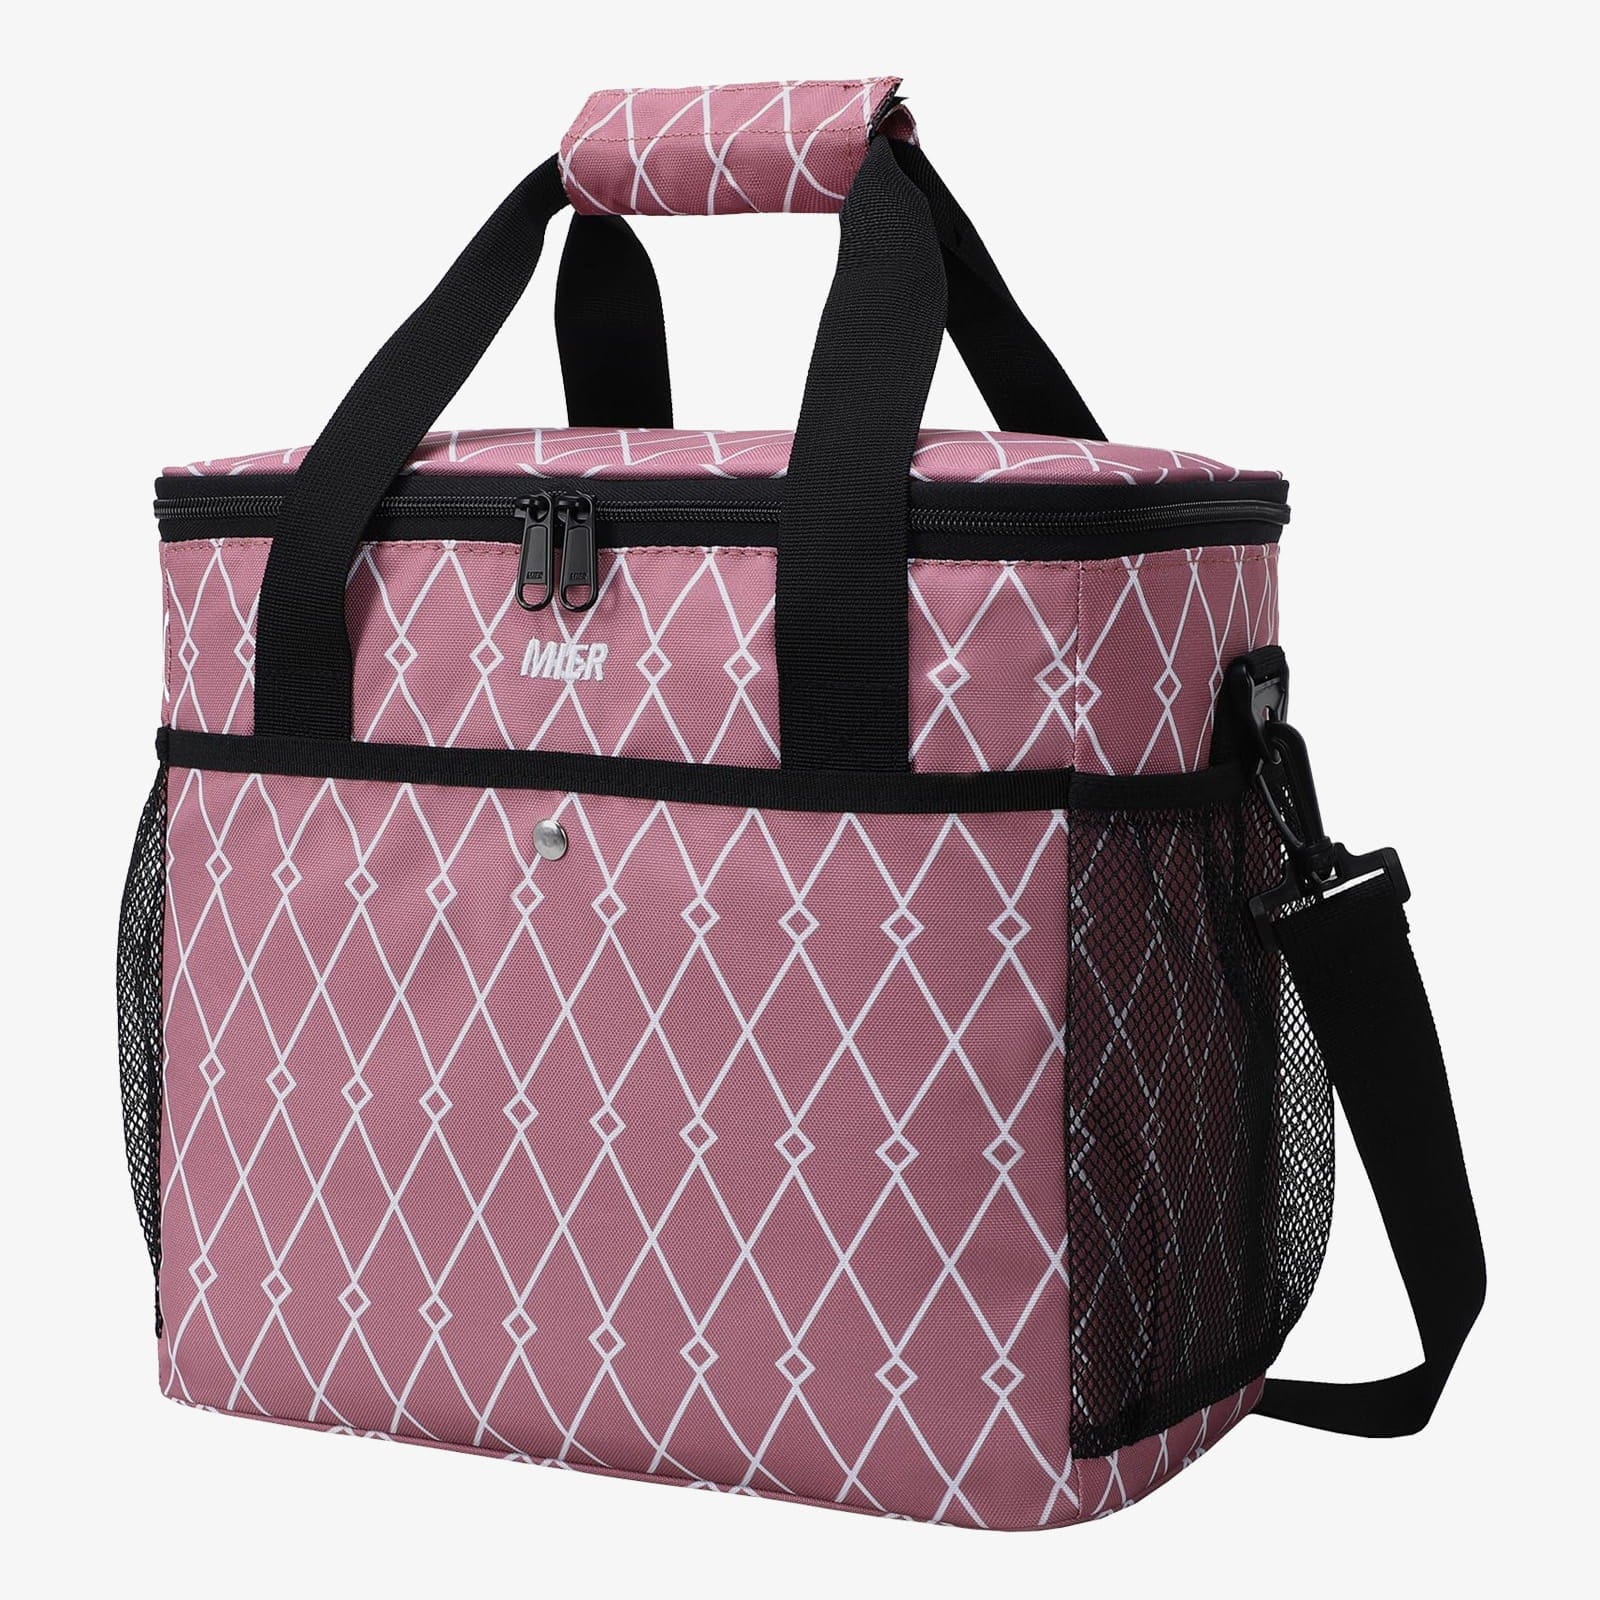 https://www.miersports.com/cdn/shop/files/large-soft-cooler-insulated-lunch-bag-tote-for-men-women-mier-31612276768902.jpg?v=1688609004